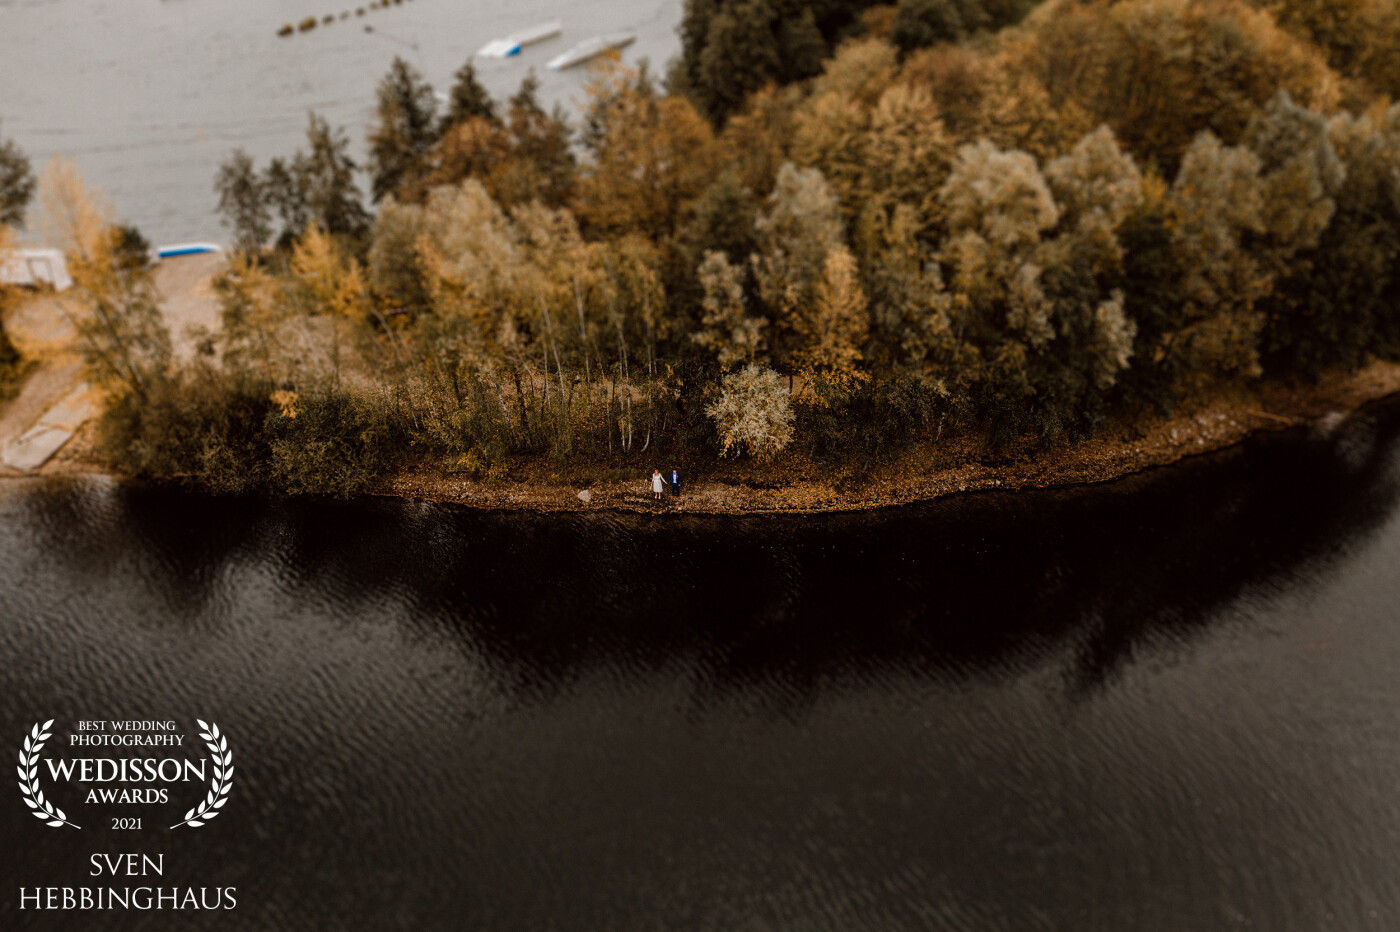 A wonderful day near Düsseldorf (GER). My couple loves this lake and it's their home base, so I had the idea to capture these two lovers from this perspective...